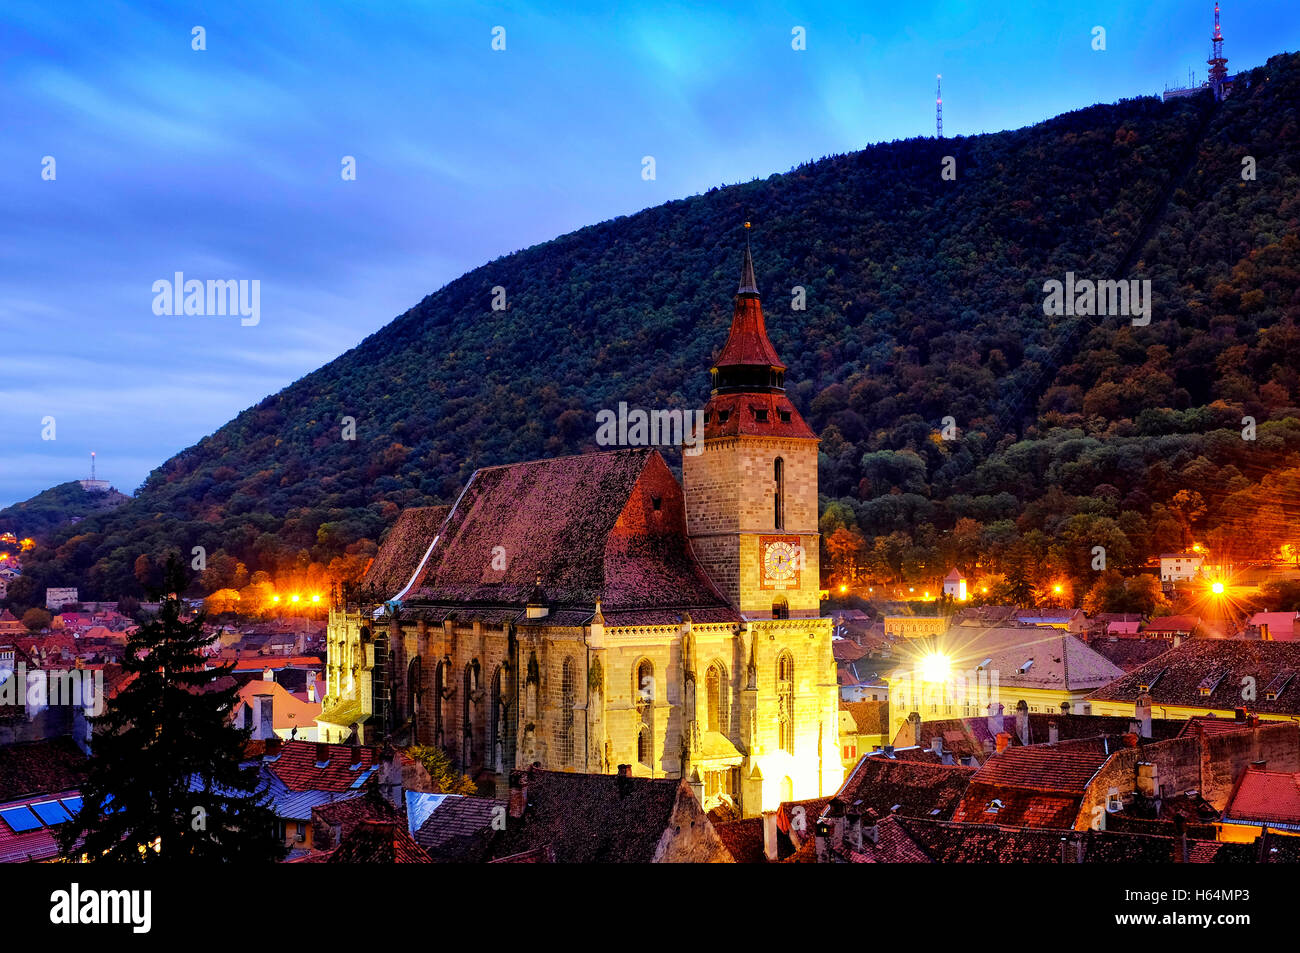 View of the Biserica Neagra (the black church) with Mount Tampa in the background, Brasov, Romania Stock Photo